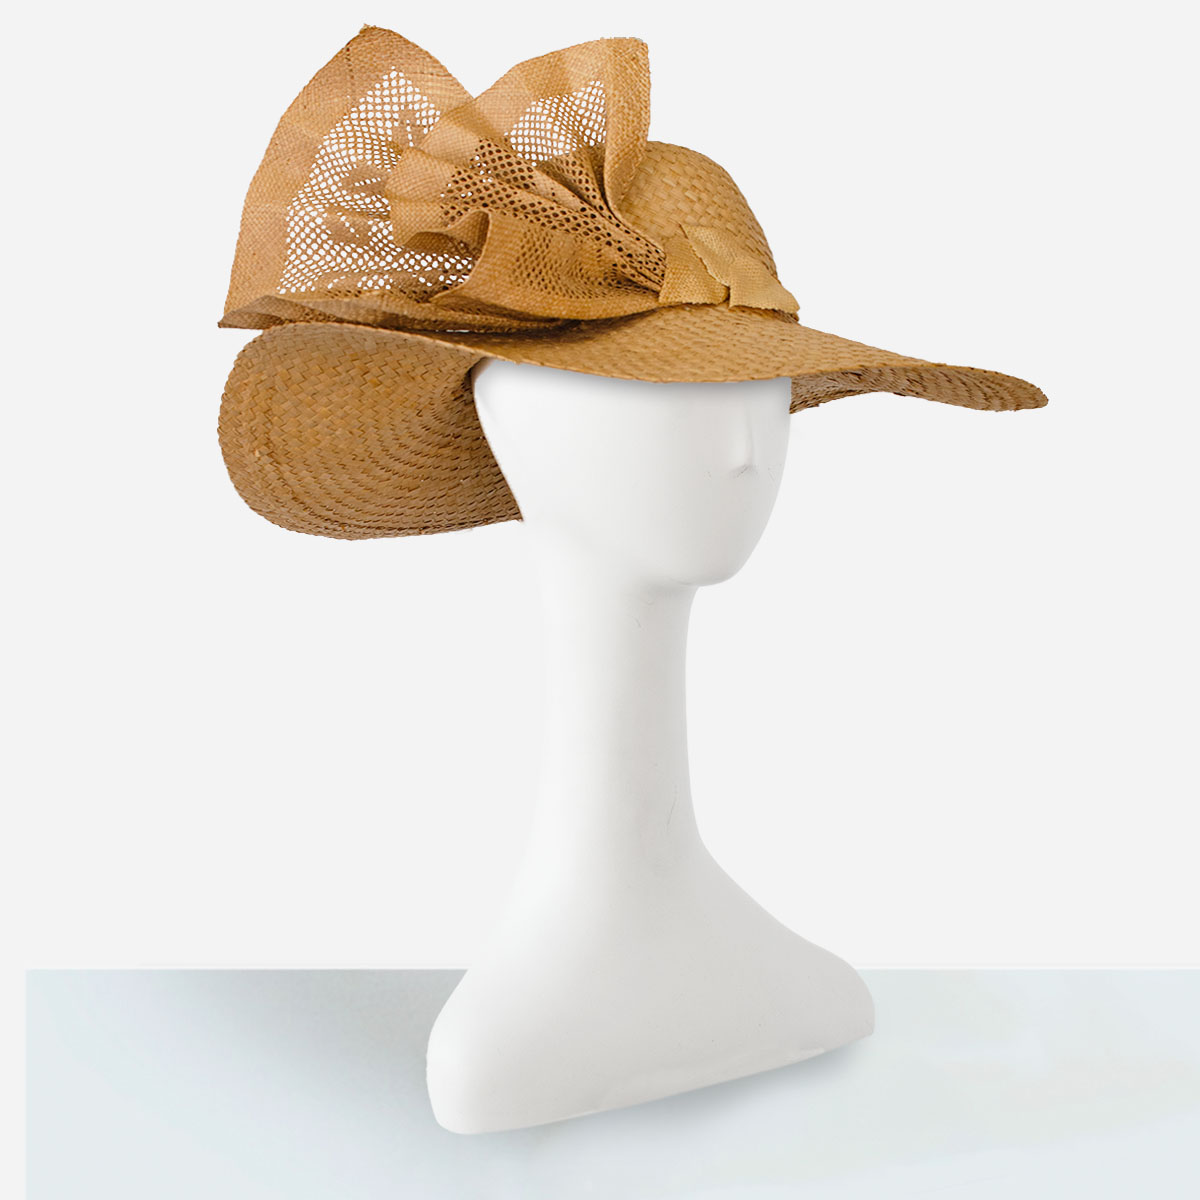 Vintage french hat, womens straw sun hat